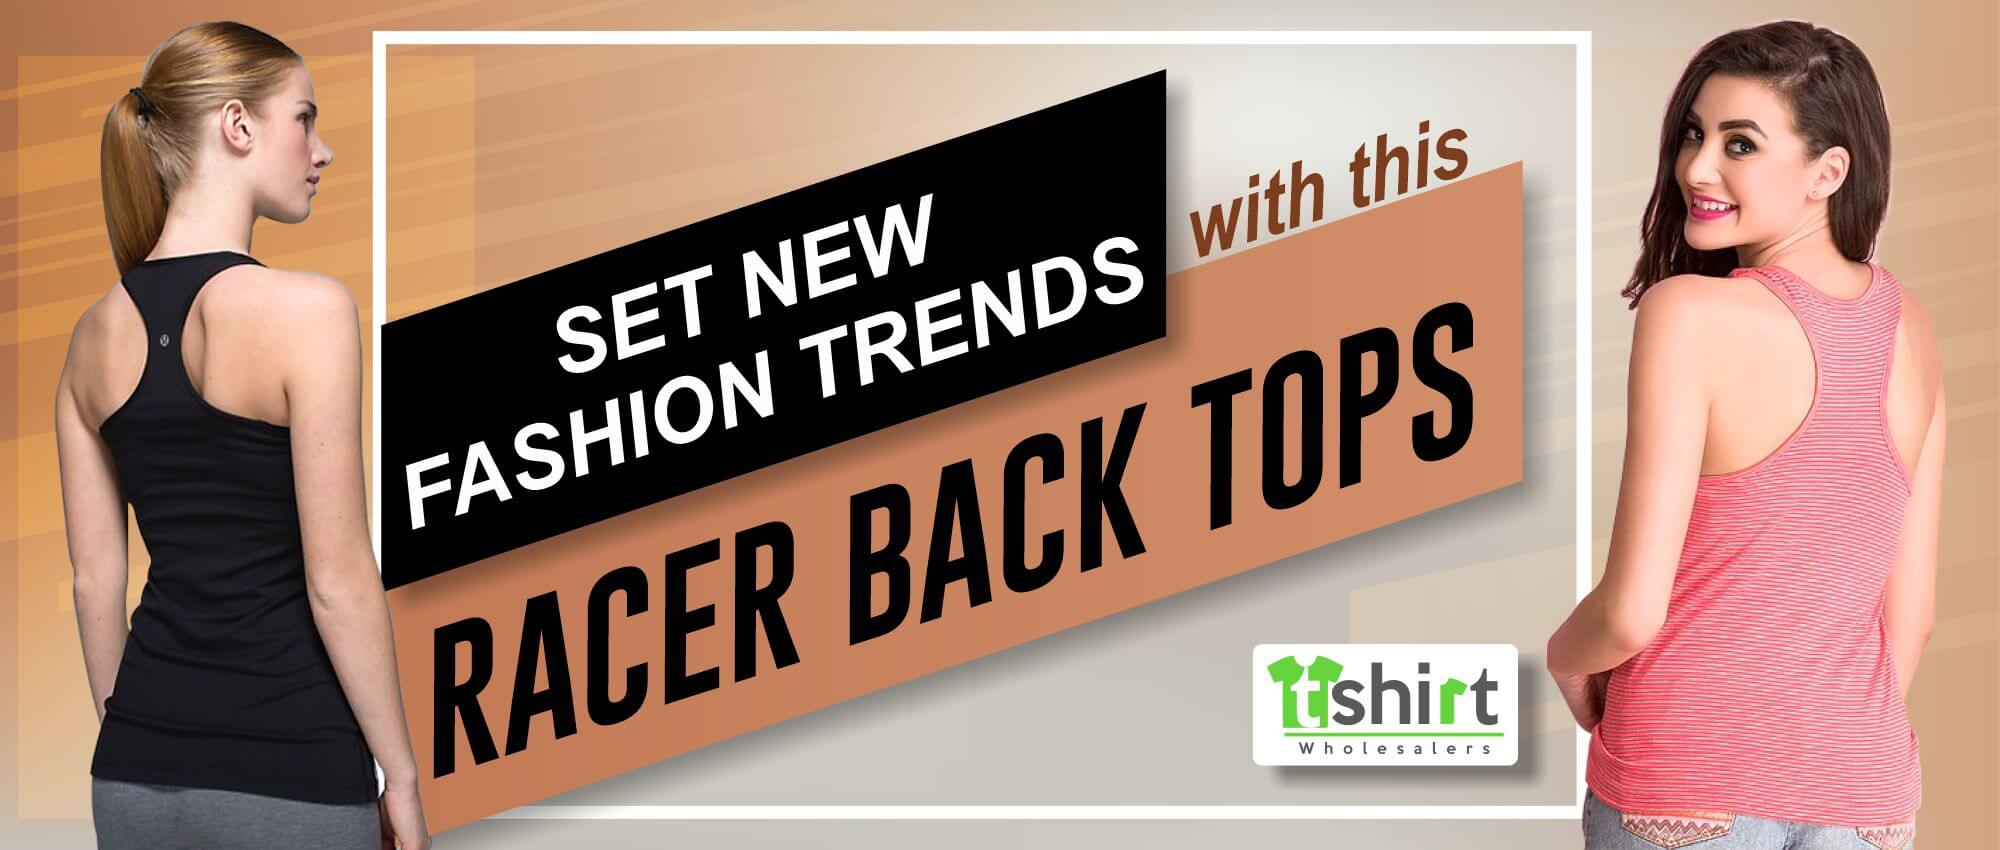 SET NEW FASHION TRENDS WITH THIS RACER BACK TOPS